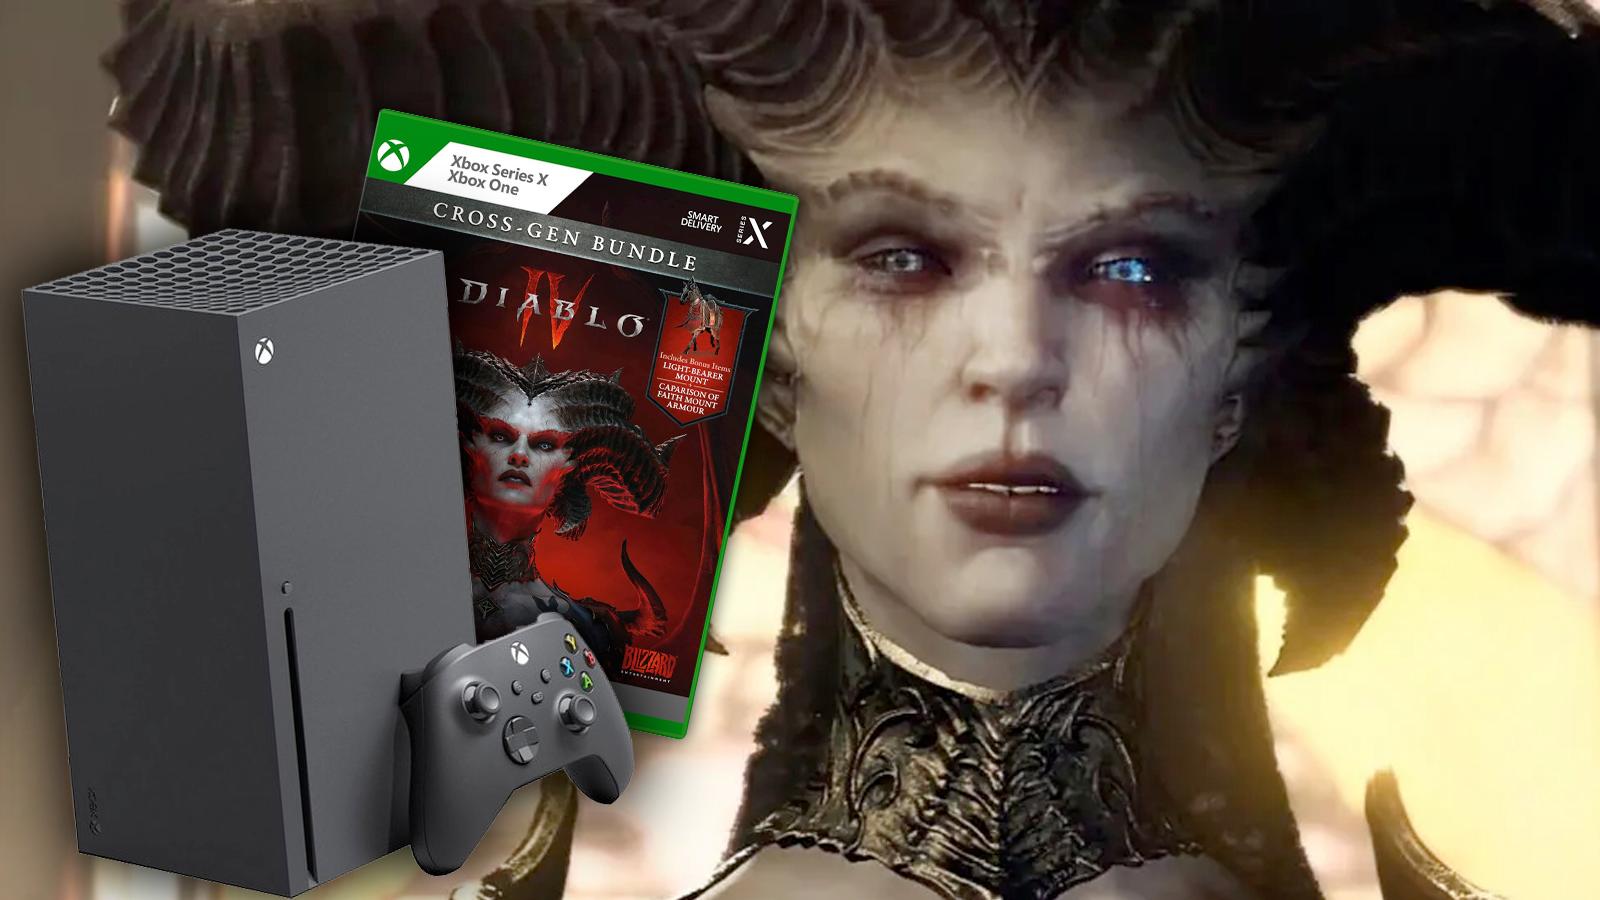 xbox series x with diablo 4 behind it and lillith from the game